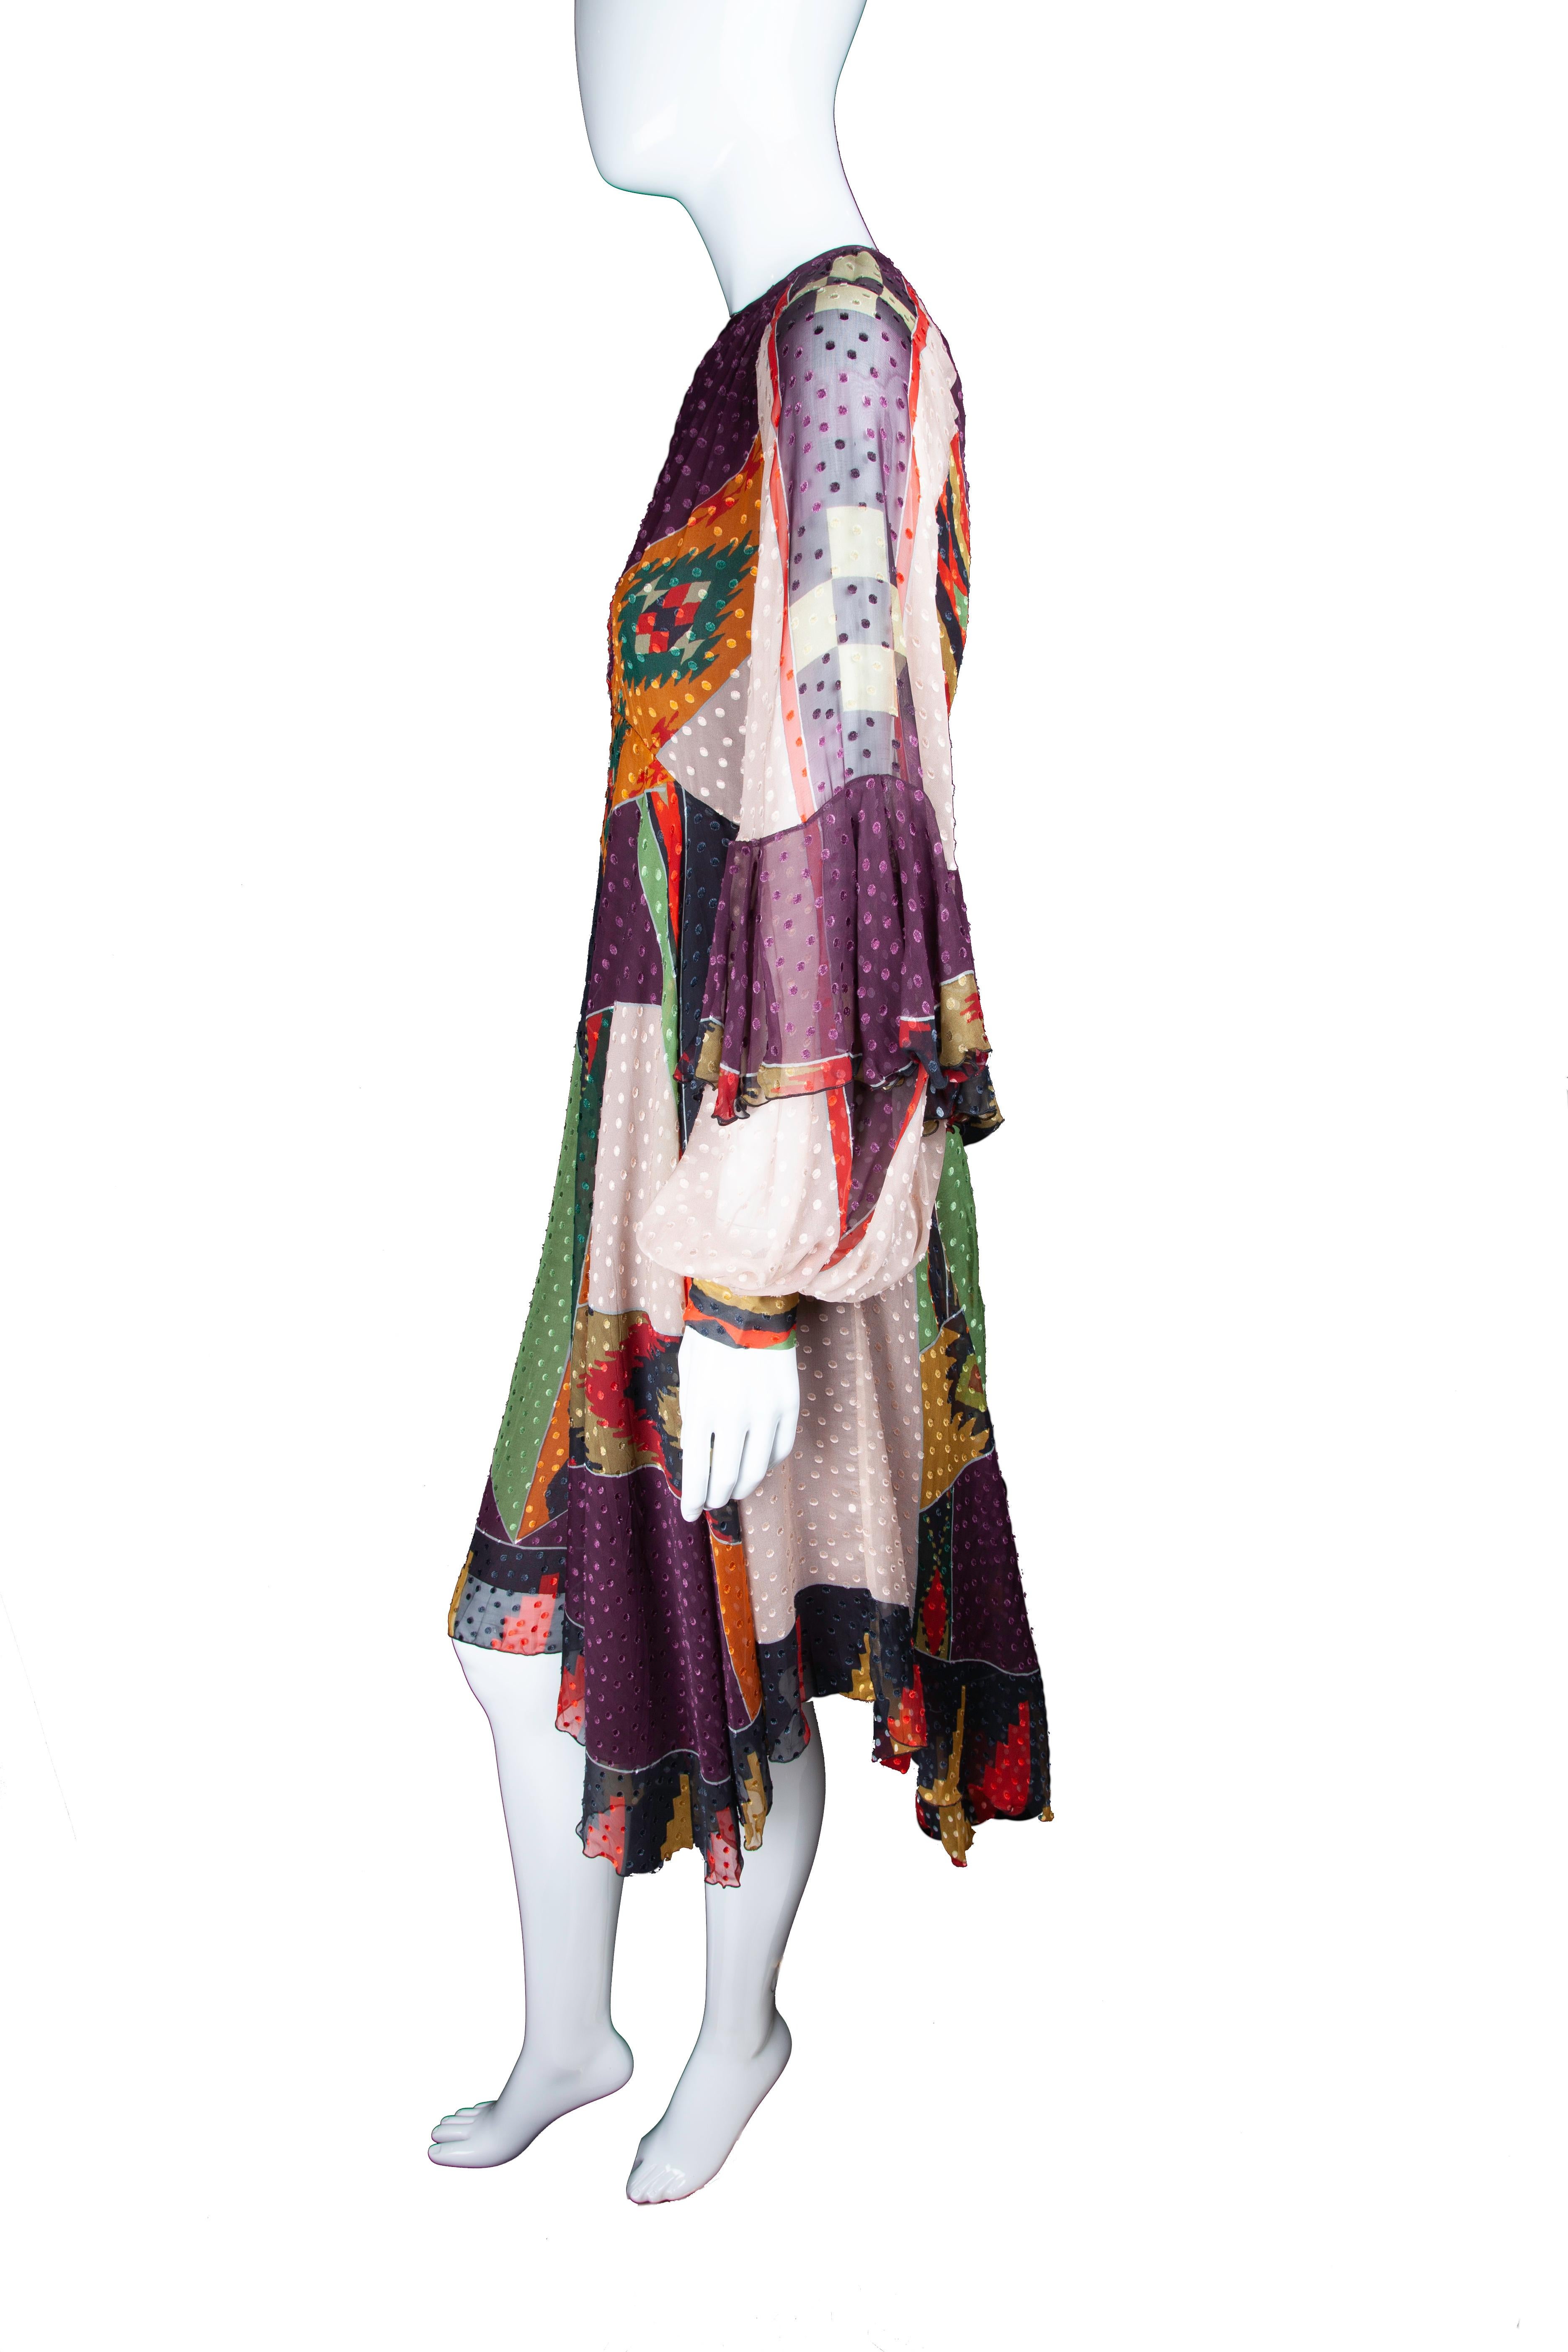 This Fall 2018 Runway Etro dress features long, balloon sleeves, a Native American inspired multicolor print, a fitted waist, flare skirt, and midi length. The dress also includes a sash that can be tied around the waist or worn as a scarf. Brand